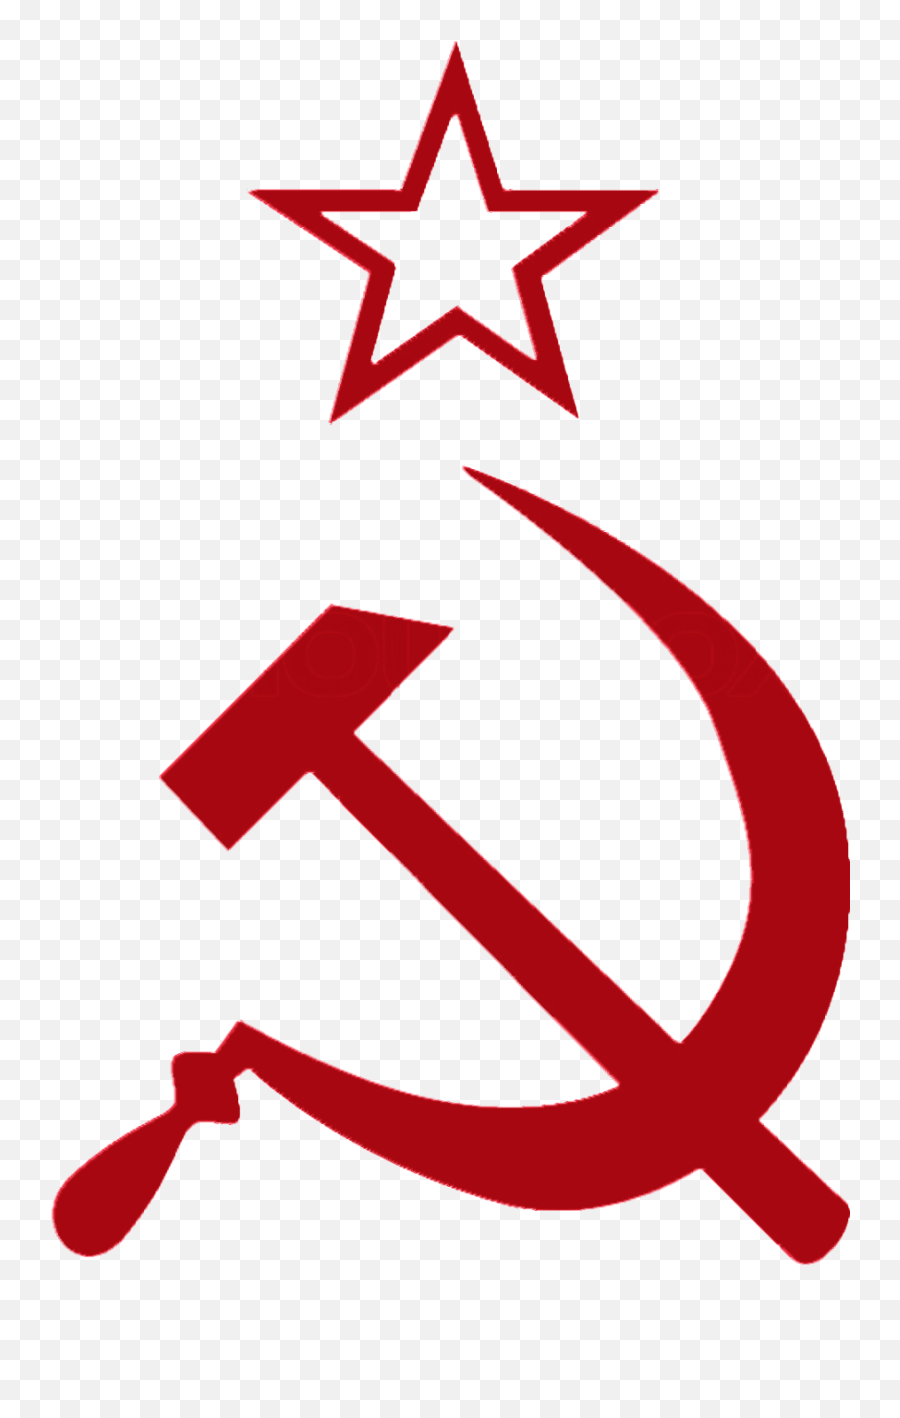 Hammer Sickle - Ussr Hammer And Sickle Vector Emoji,Hammer And Sickle Emoji